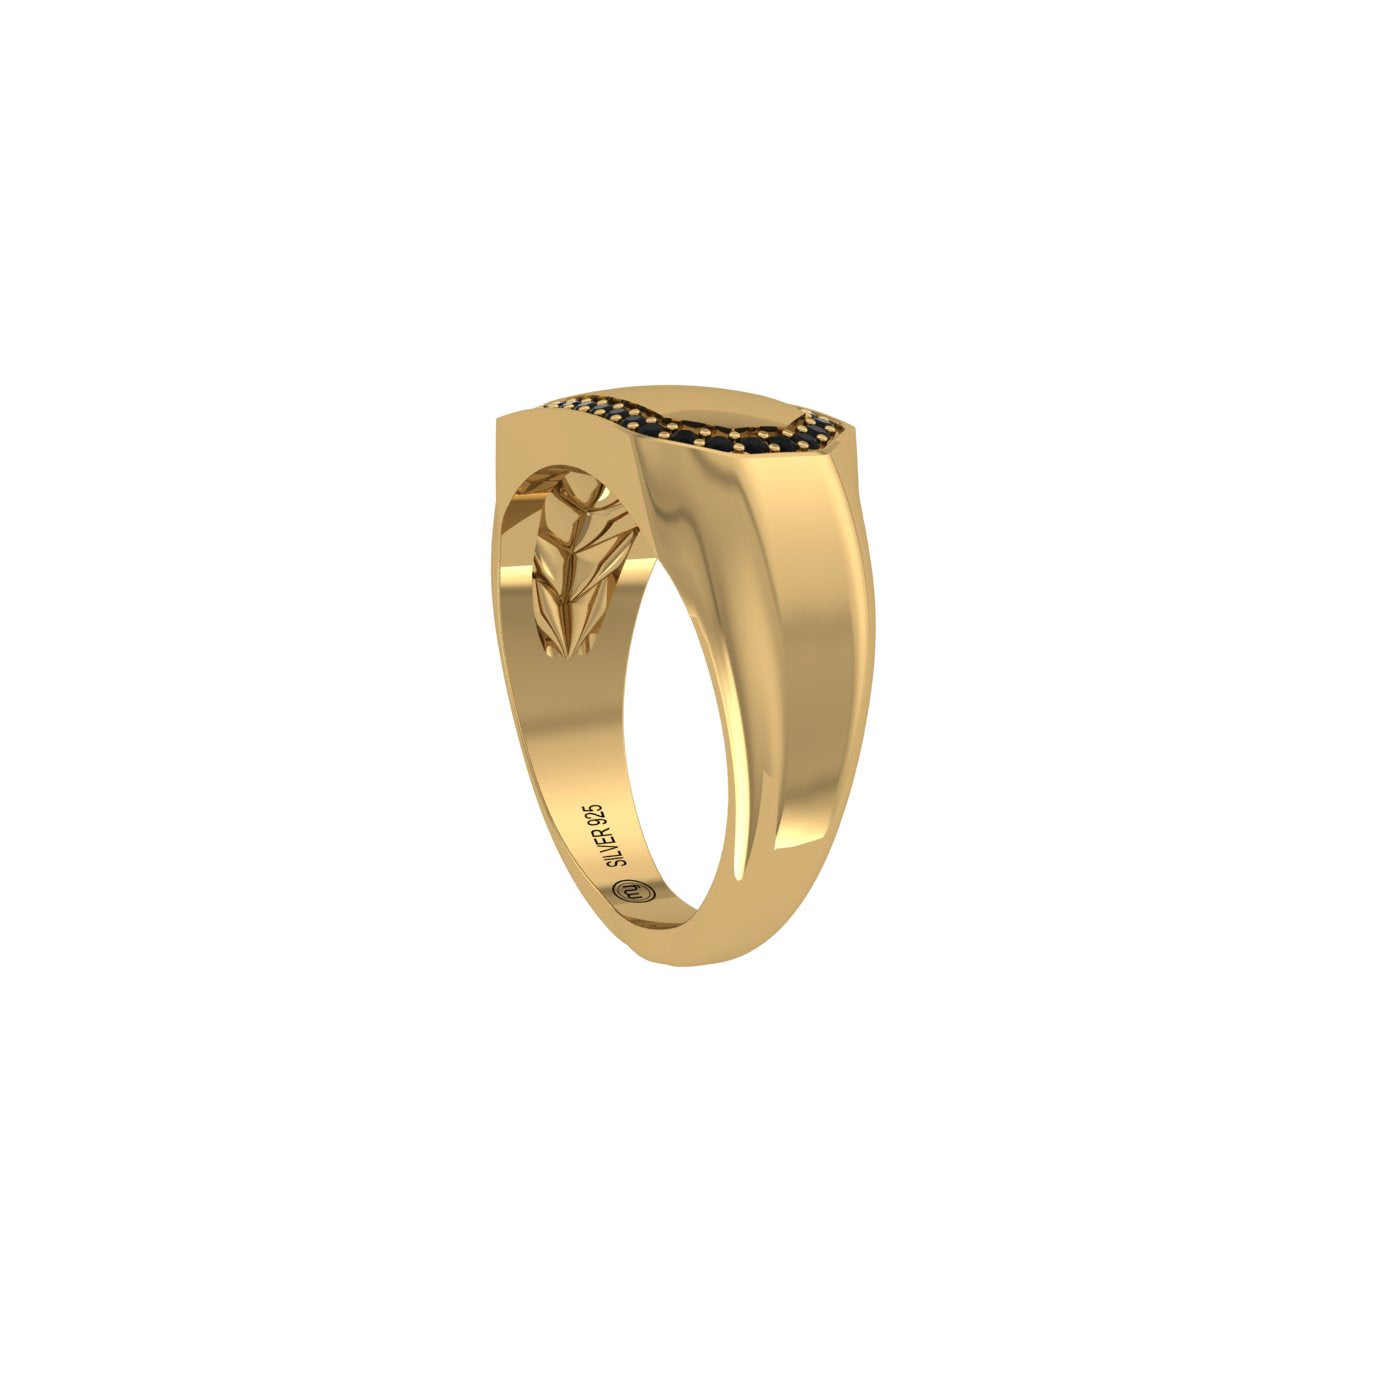 The Confident Sturdy Men's Ring